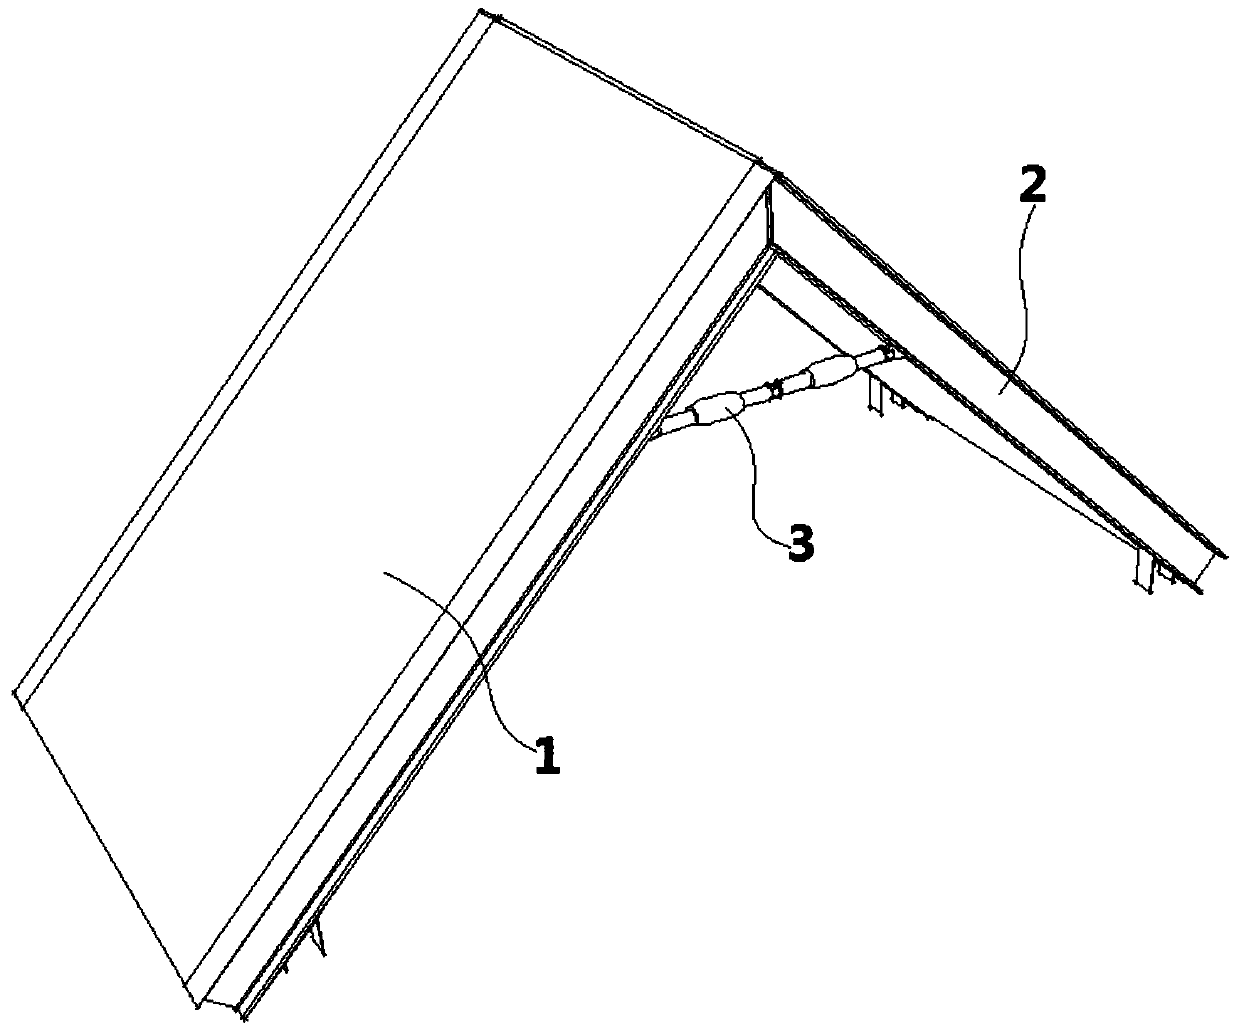 Self-stabilized variable-slope high-performance prefabricated roof